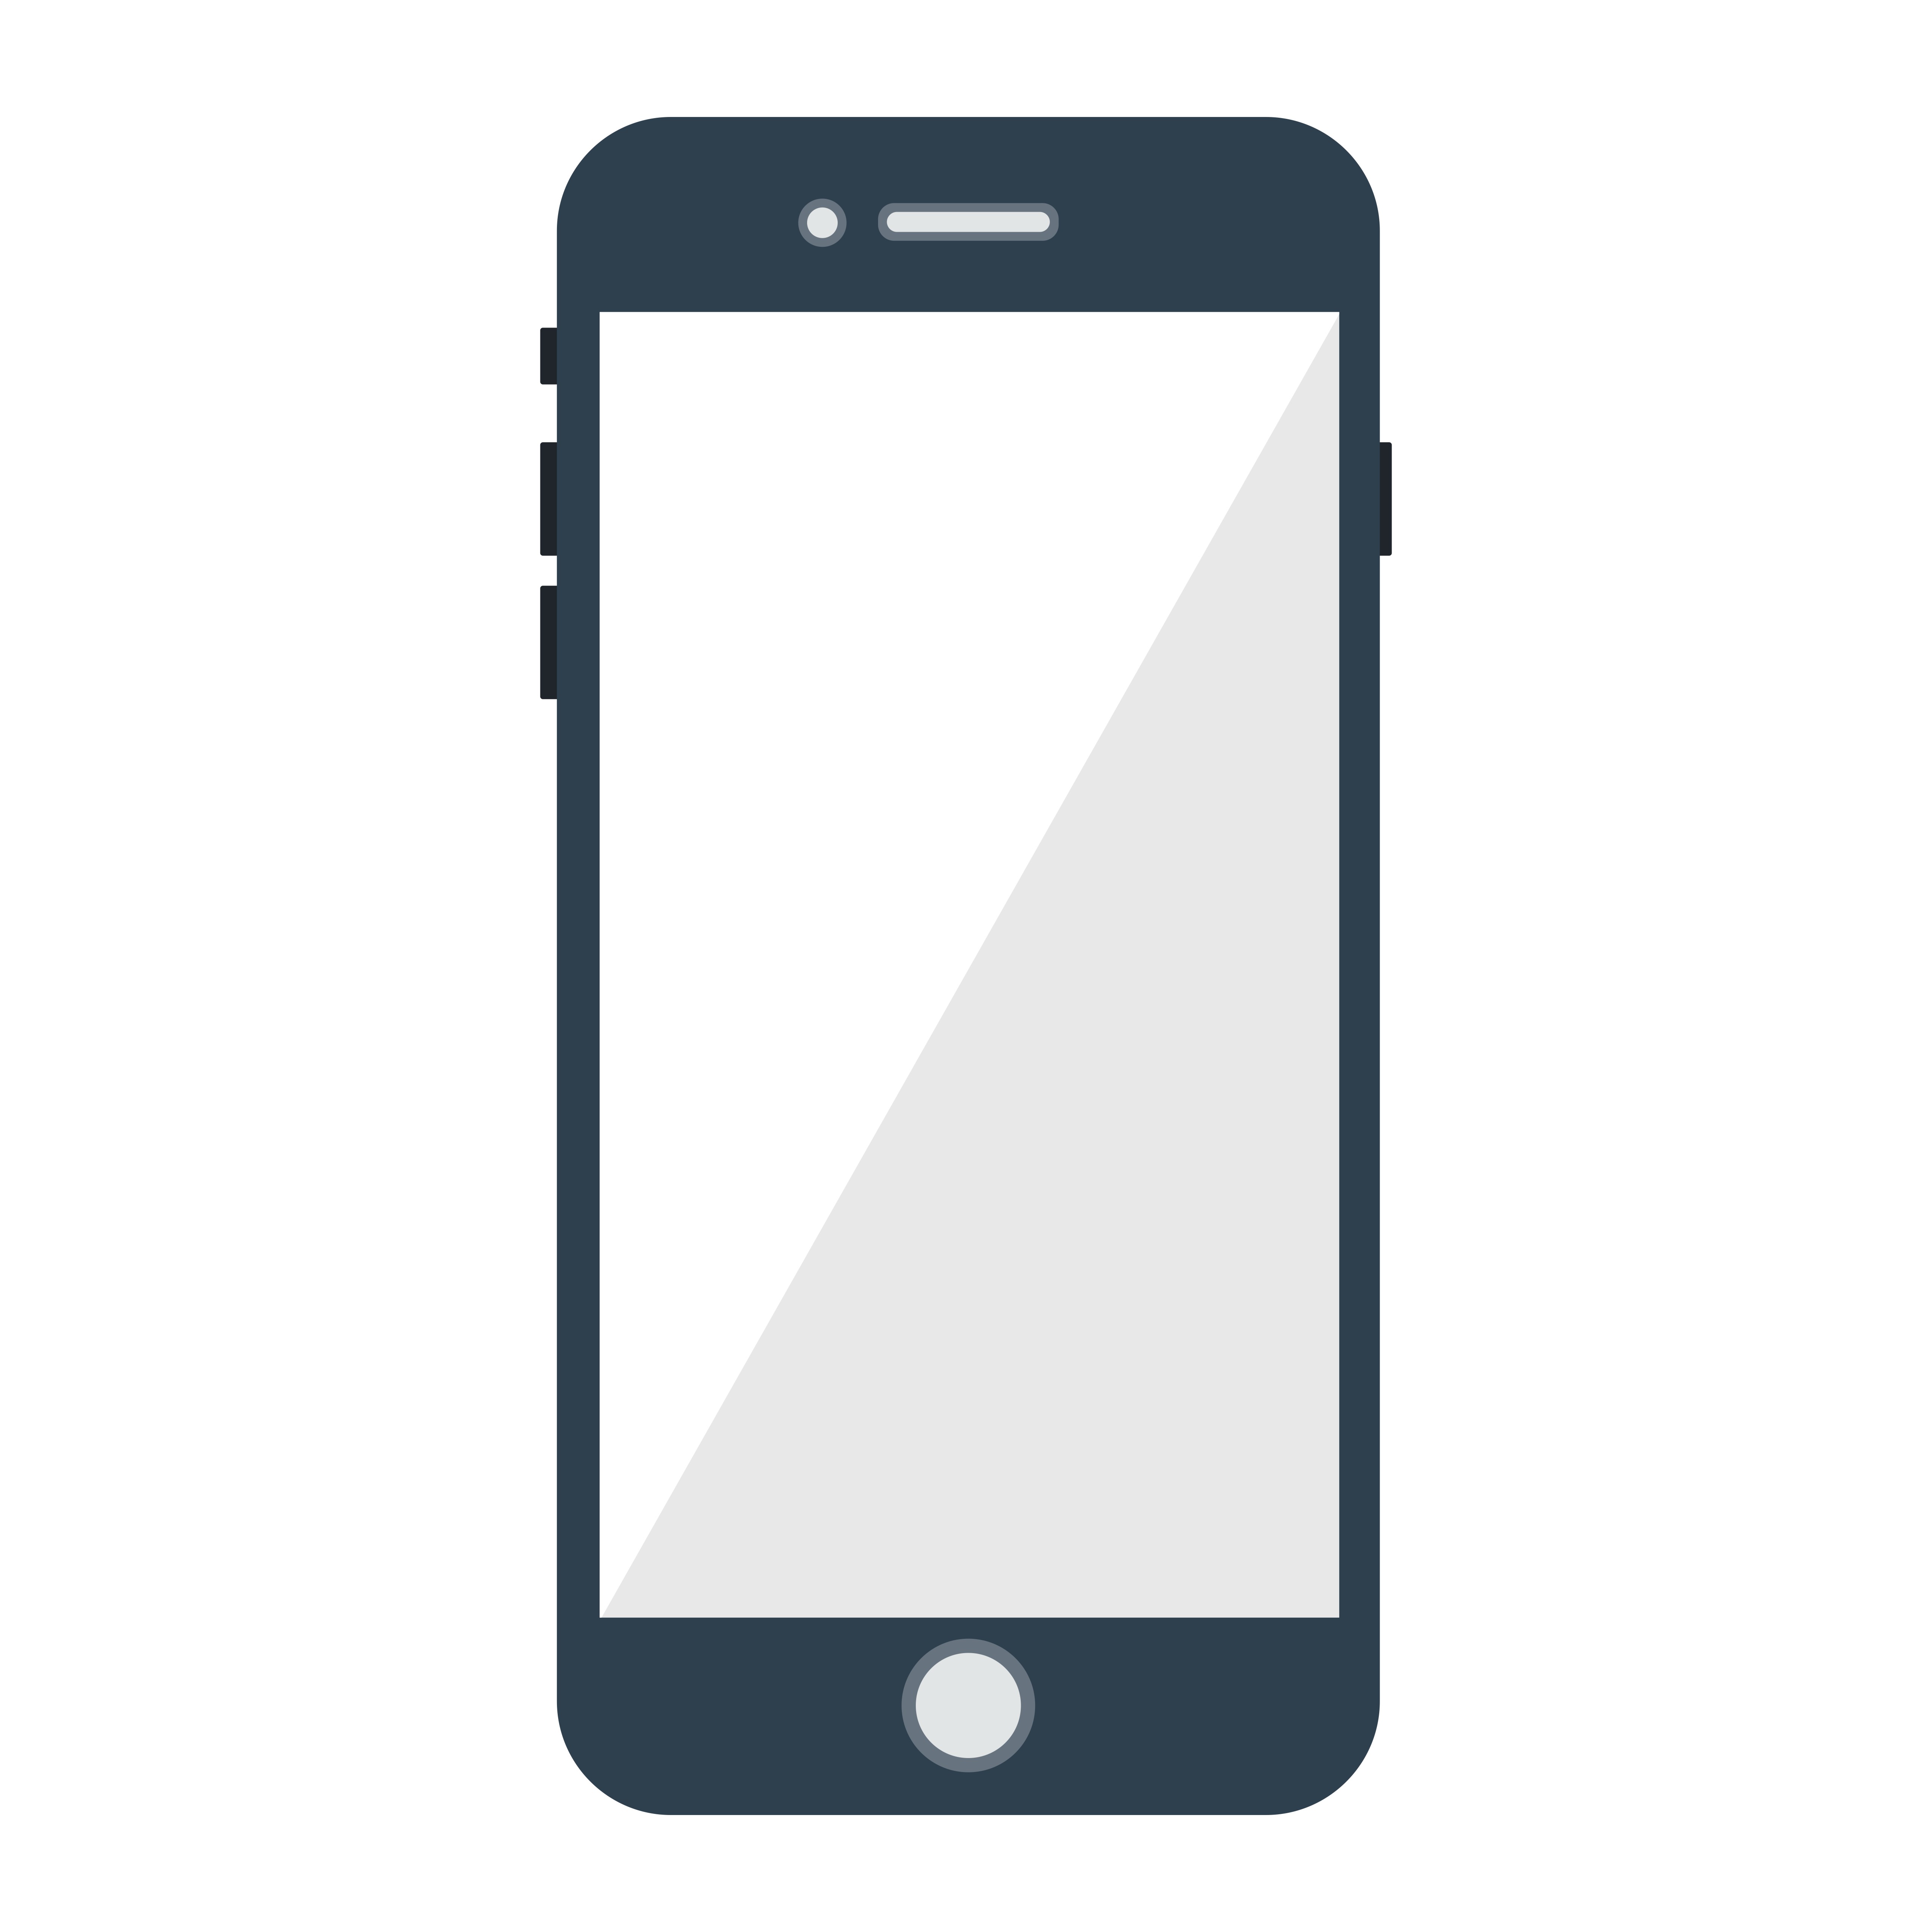 Cell Phone Vector Art, Icons, and Graphics for Free Download